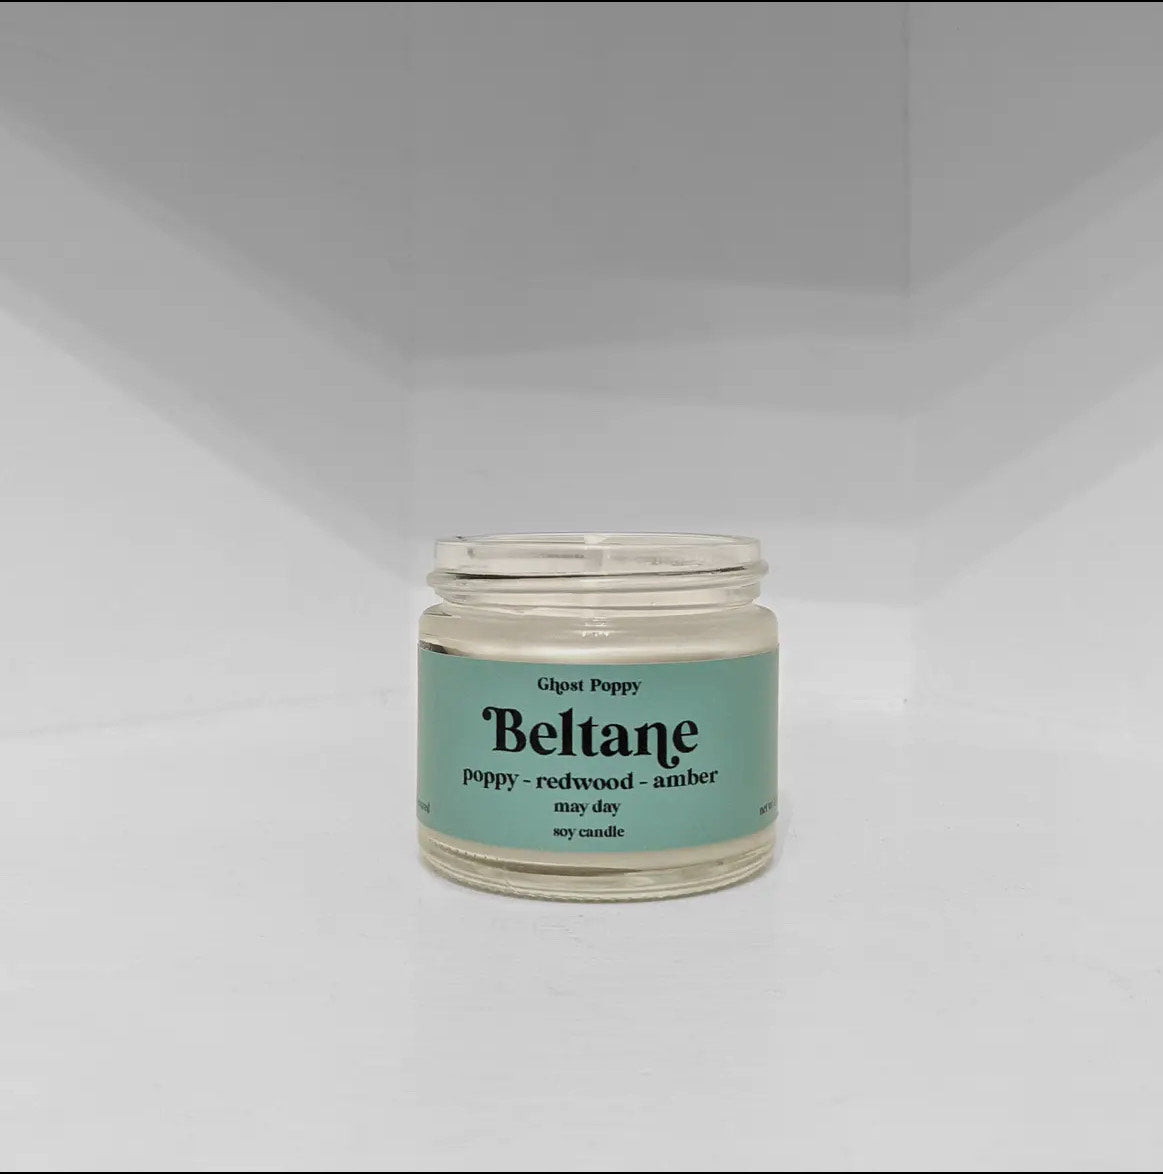 Beltane Mini Candle- Beltaine 2 fluid oz Candle